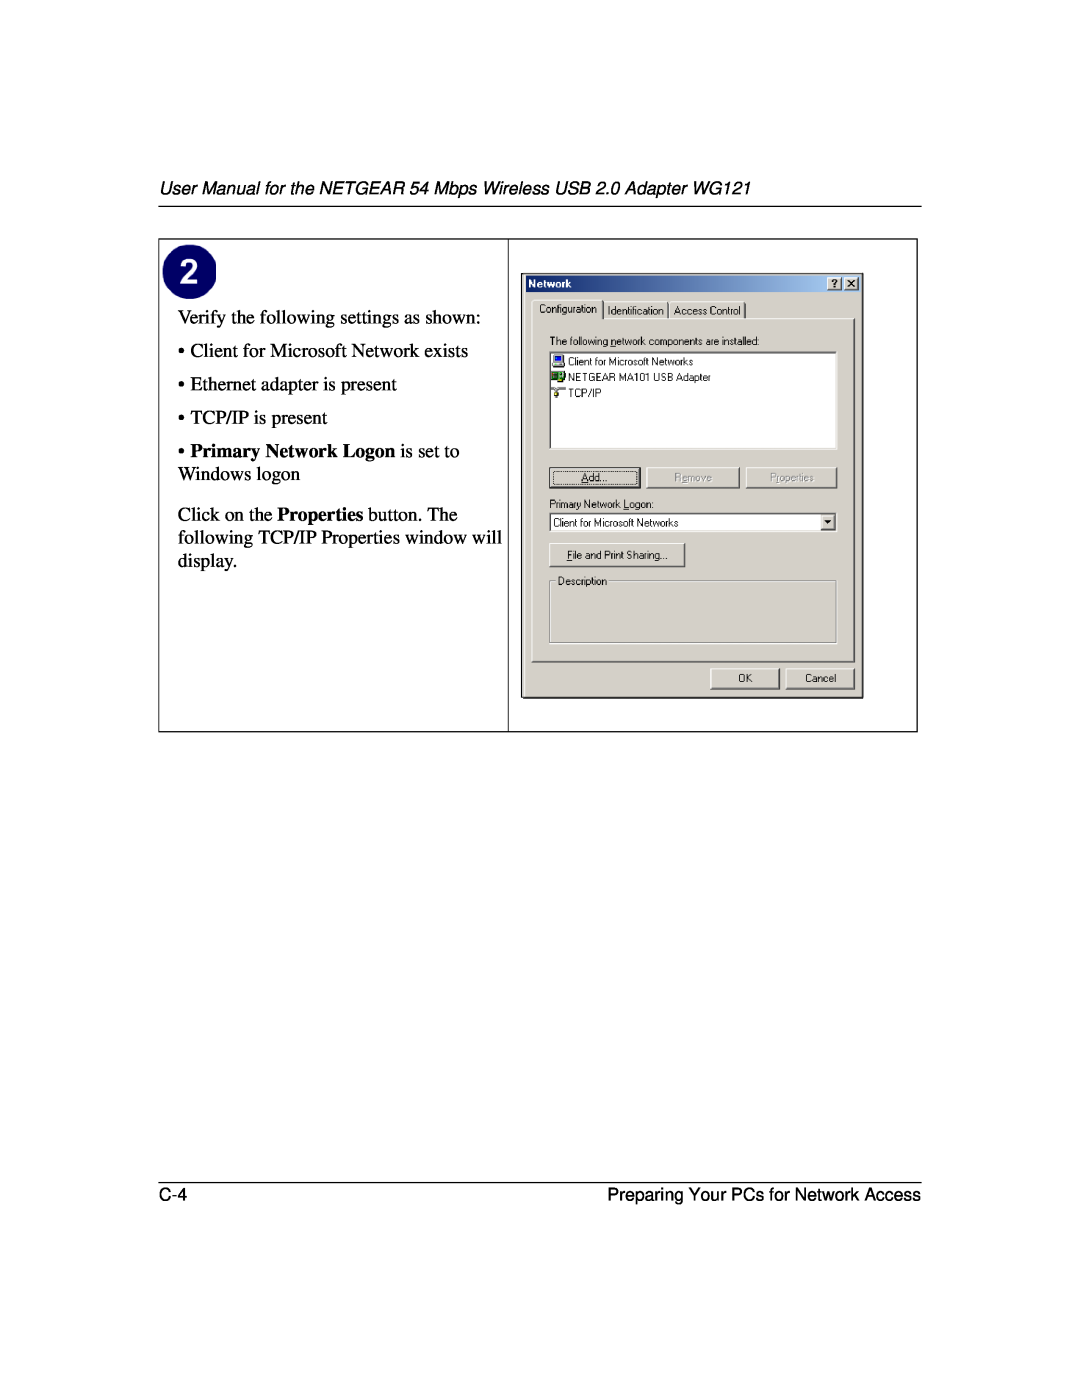 NETGEAR WG121 Verify the following settings as shown, Client for Microsoft Network exists Ethernet adapter is present 